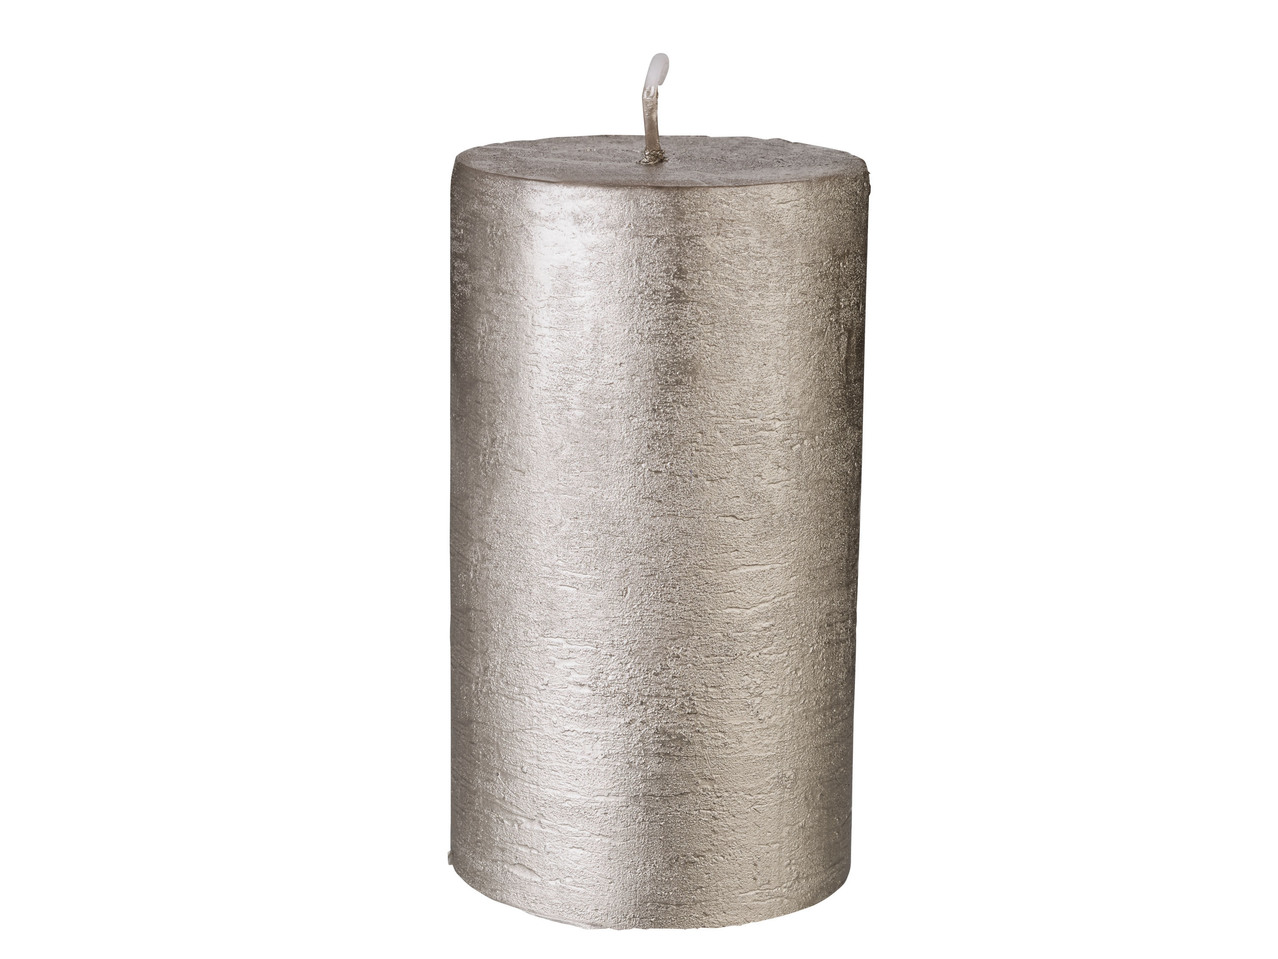 Scented Candle in a Pot or Metallic Candle Effect